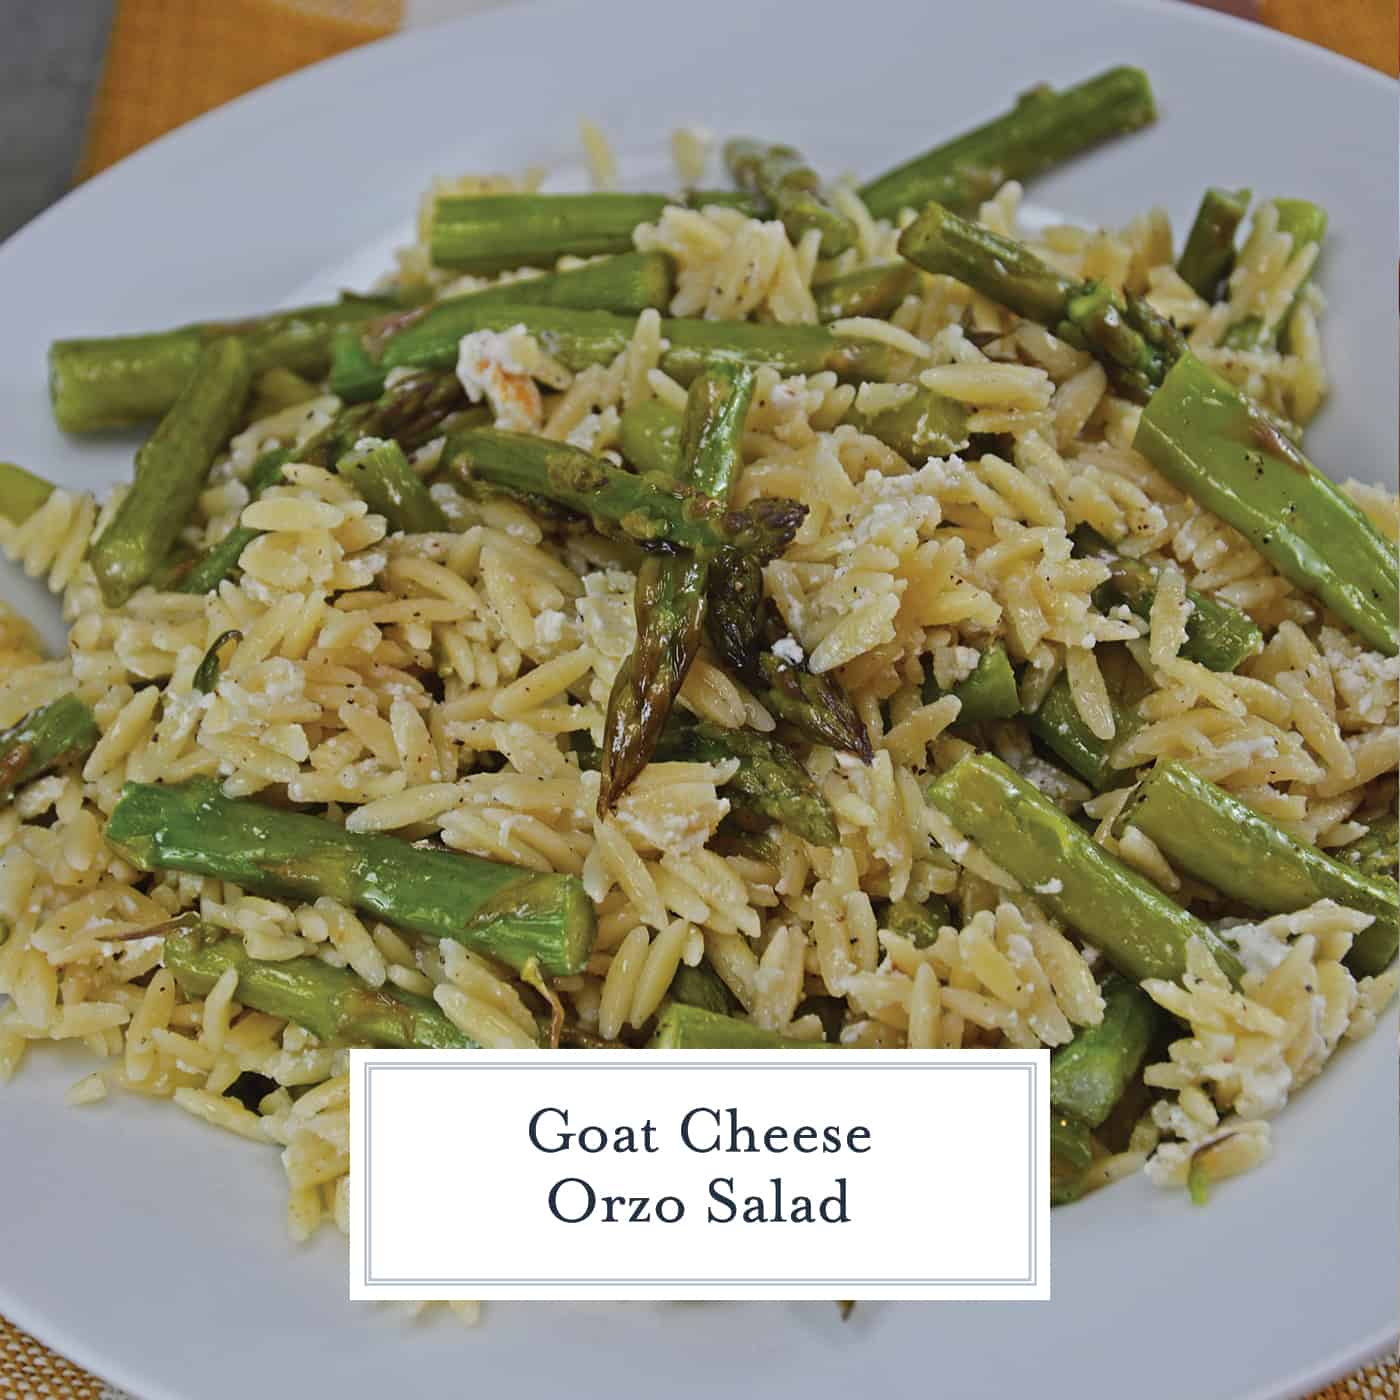 Goat Cheese Orzo Salad is a quick side dish recipe that uses quick cooking pasta with creamy goat cheese and roasted asparagus spears. #orzosalad #goatcheese www.savoryexperiments.com